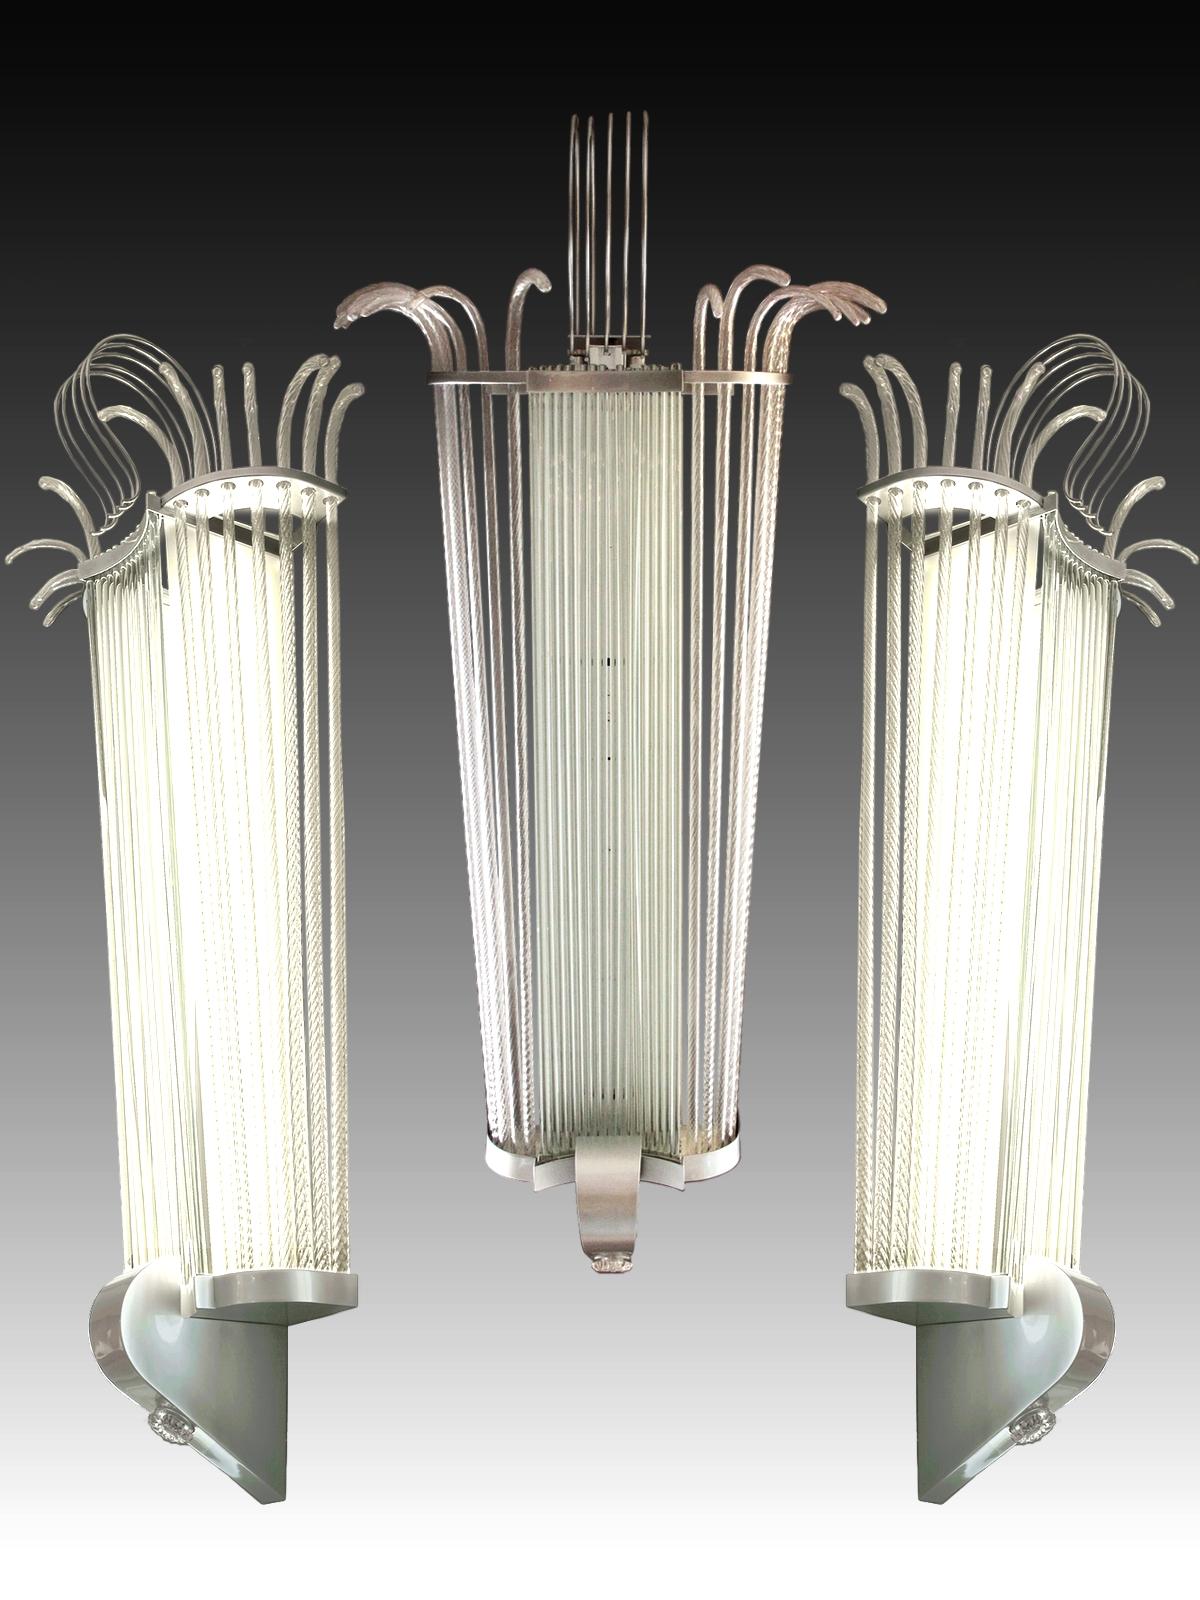 Suite of five monumental wall lamps, 1940s period.
They are made of metal, solid glass tubes and twisted blown Murano glass canes. 
The lighting consists of two large (120 cm) neon tubes for each wall lamp.

The dimensions are given in the